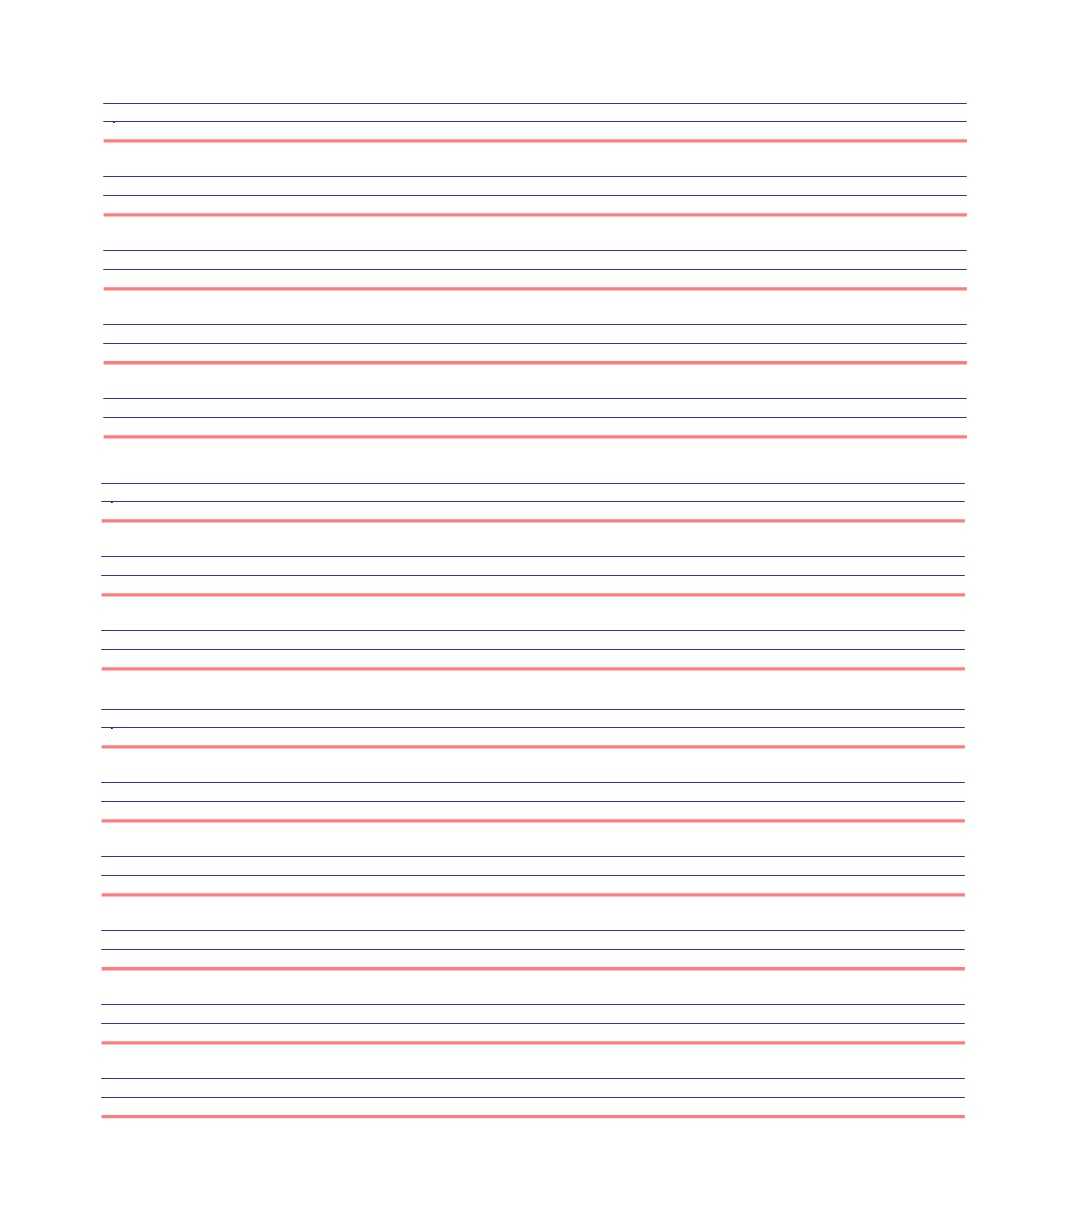 Microsoft Word Notebook Paper Template – Tomope.zaribanks.co Within Notebook Paper Template For Word 2010